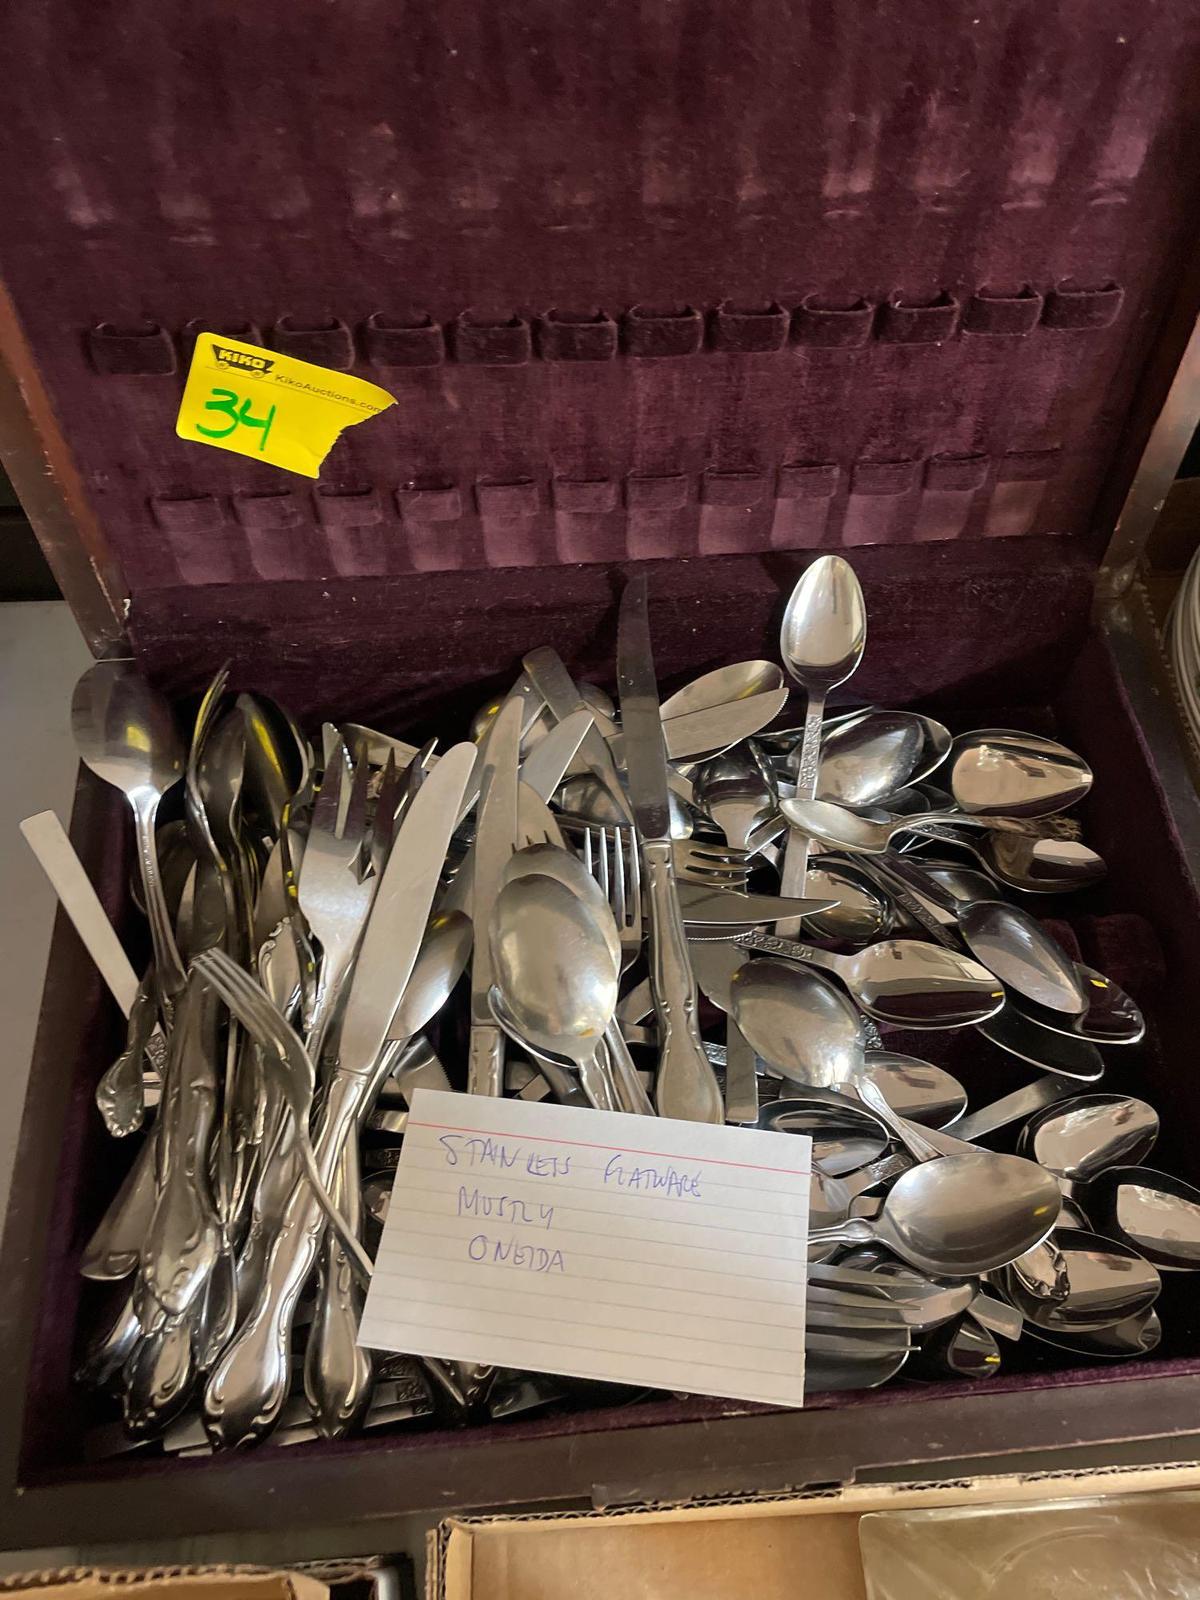 stainless flatware mostly Oneida